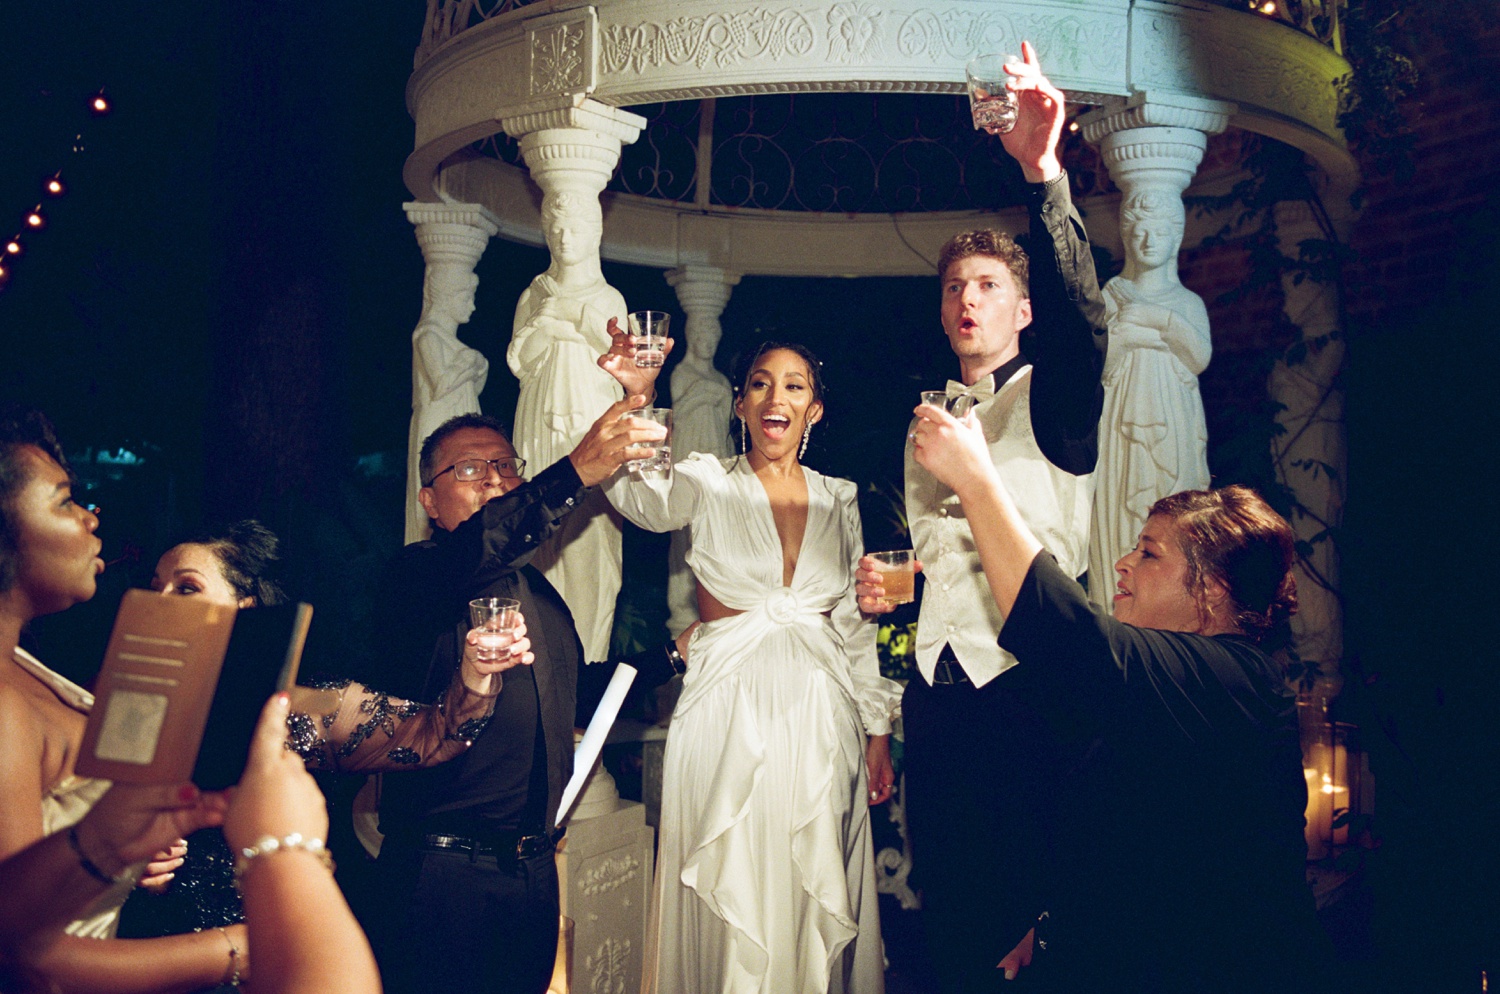 A bride and groom raise glasses for a wedding toast in film wedding photography at a Philadelphia wedding venue.